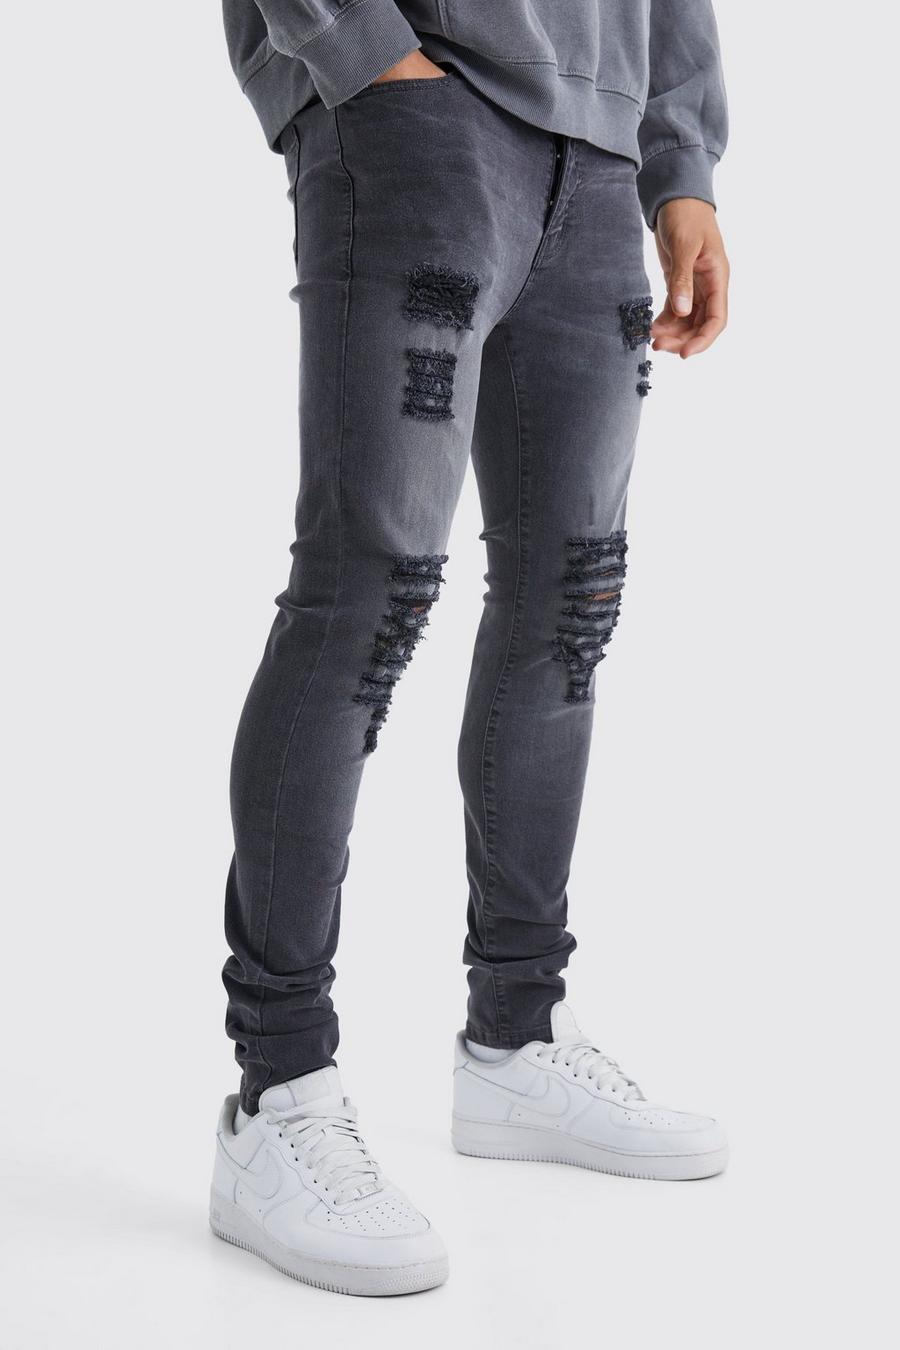 Charcoal Tall Skinny Jeans With All Over Rips